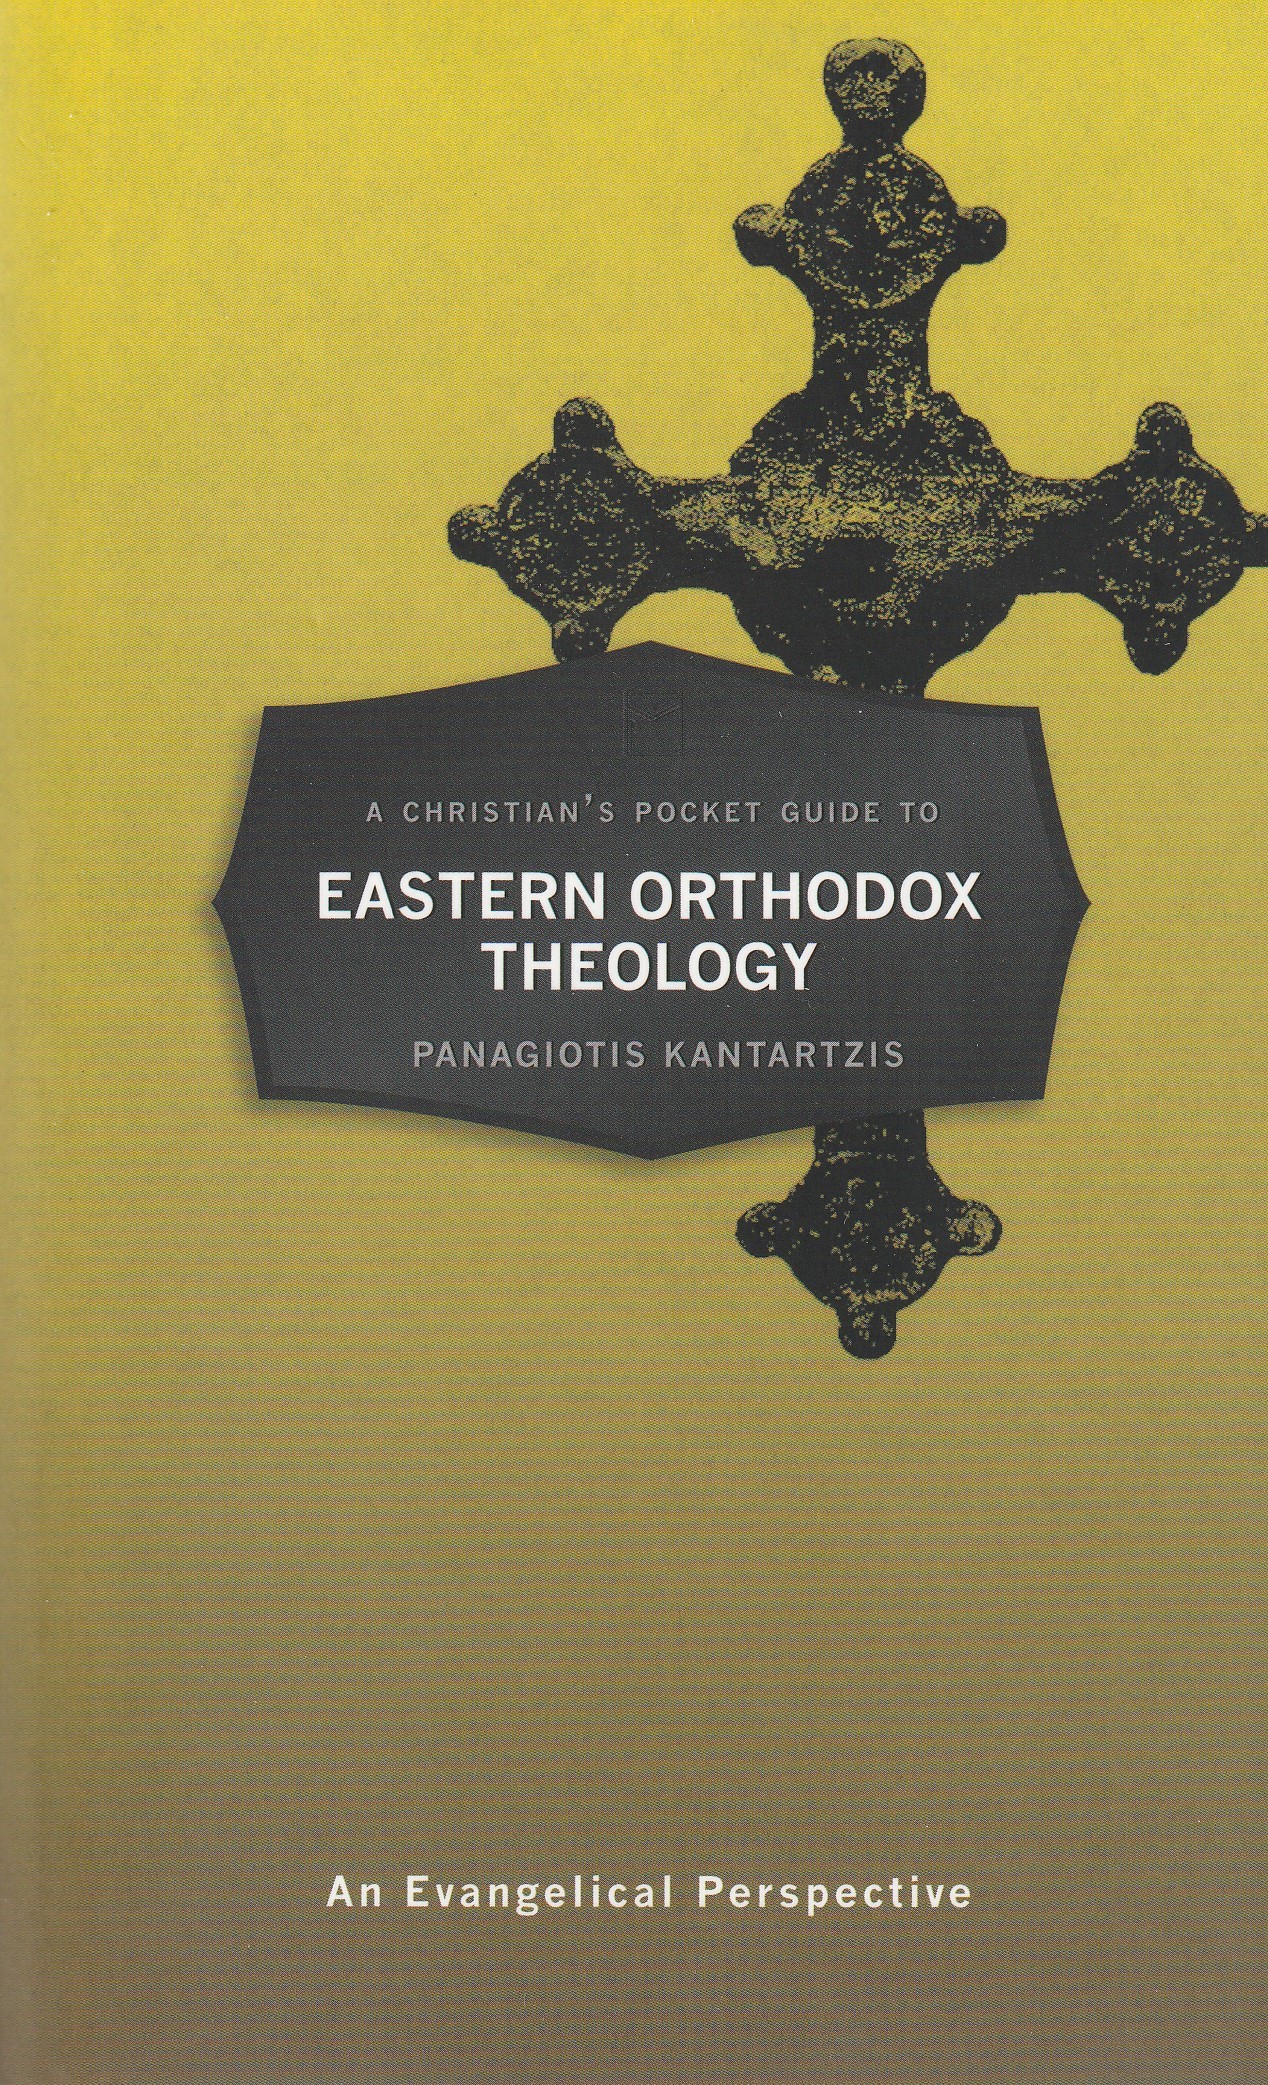 A Christian's Pocket Guide to Eastern Orthodox Theology